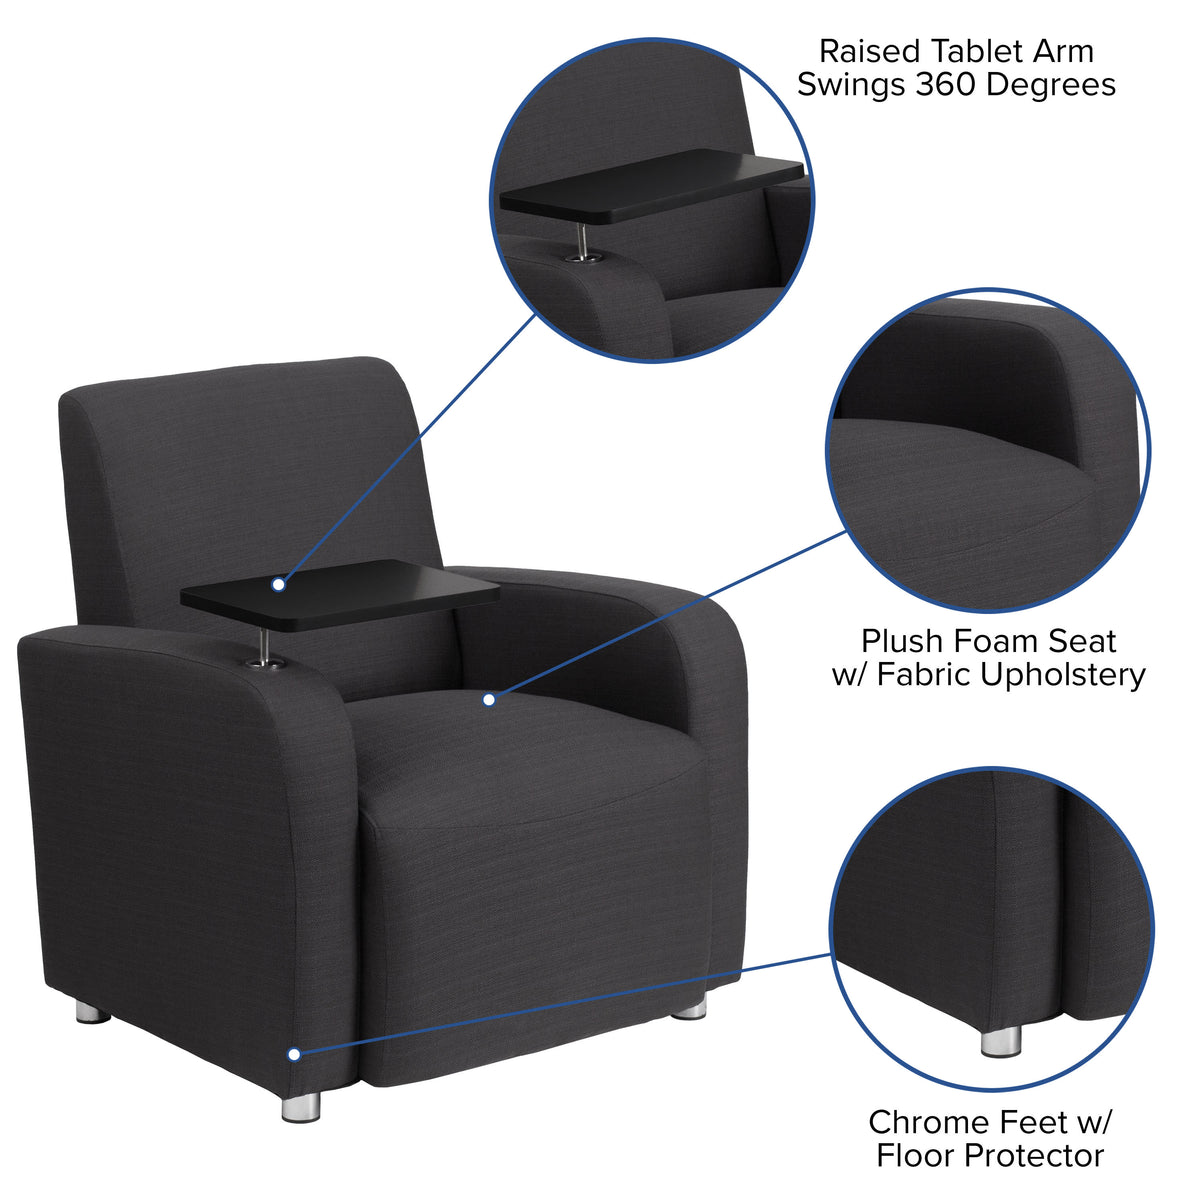 Black LeatherSoft |#| Black LeatherSoft Guest Chair with Tablet Arm, Tall Chrome Legs and Cup Holder